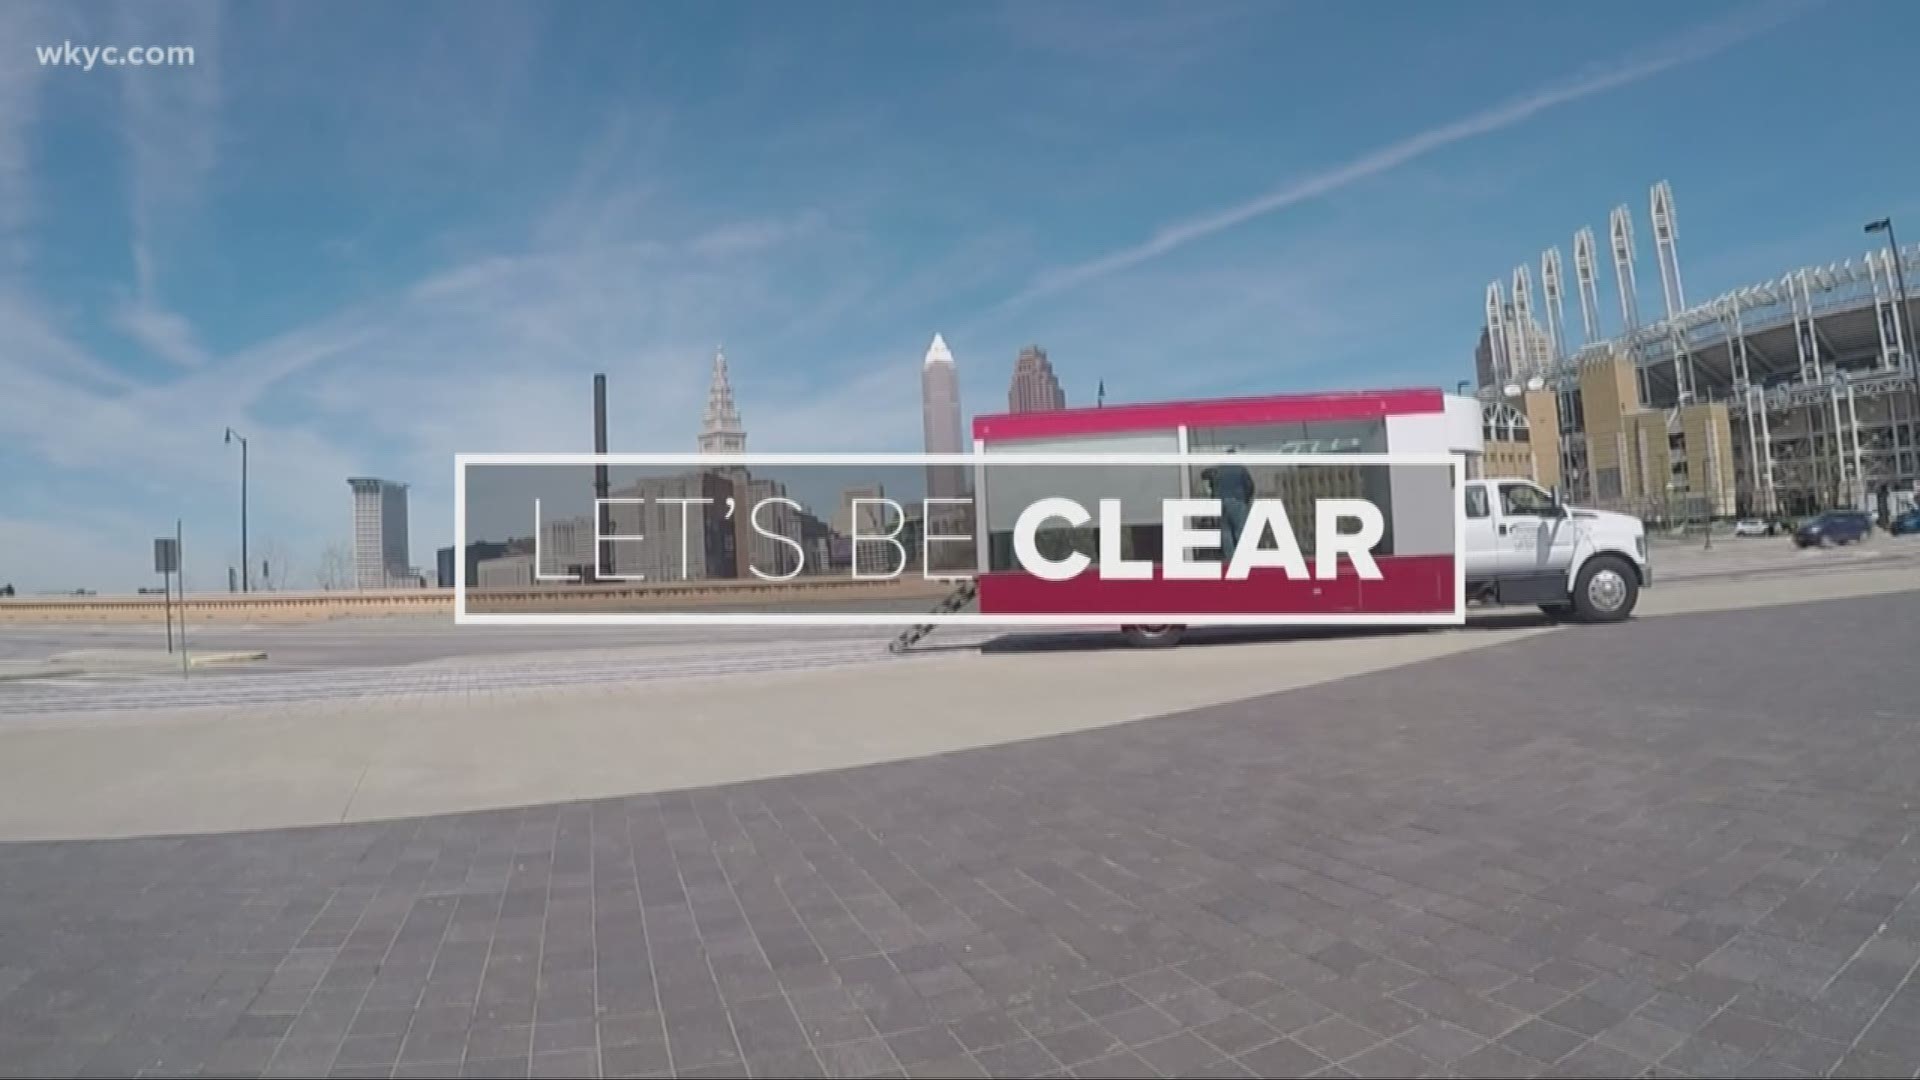 WKYC will air a "Let's Be Clear" special Friday night at 11.